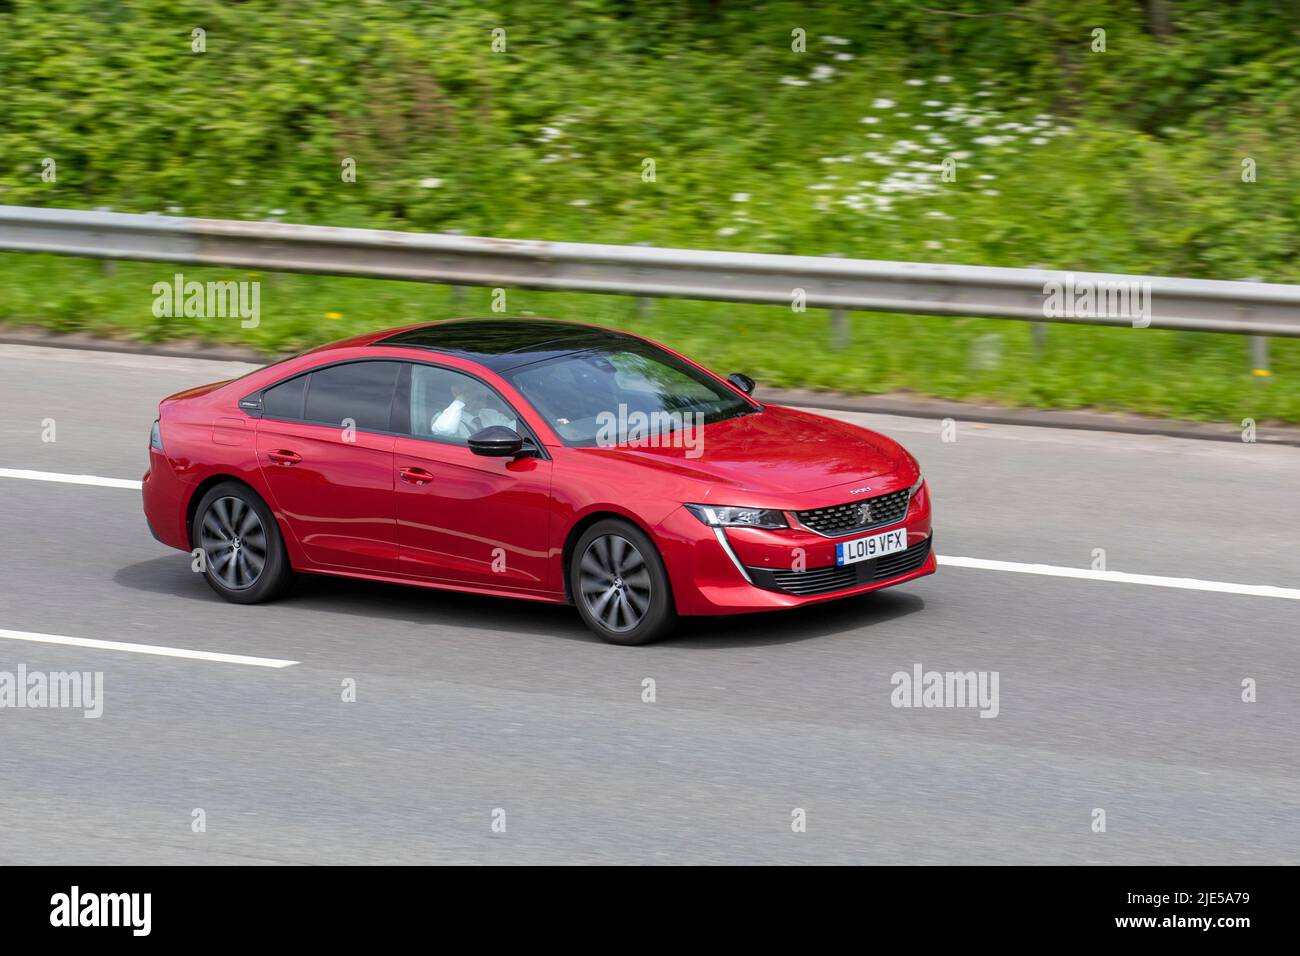 2019 red Peugeot 508 GT line Bluehdi S/S Auto 1.5L 130 EAT8 Start Stop 1500cc Diesel hatchback;  traveling on the M6 motorway, UK Stock Photo